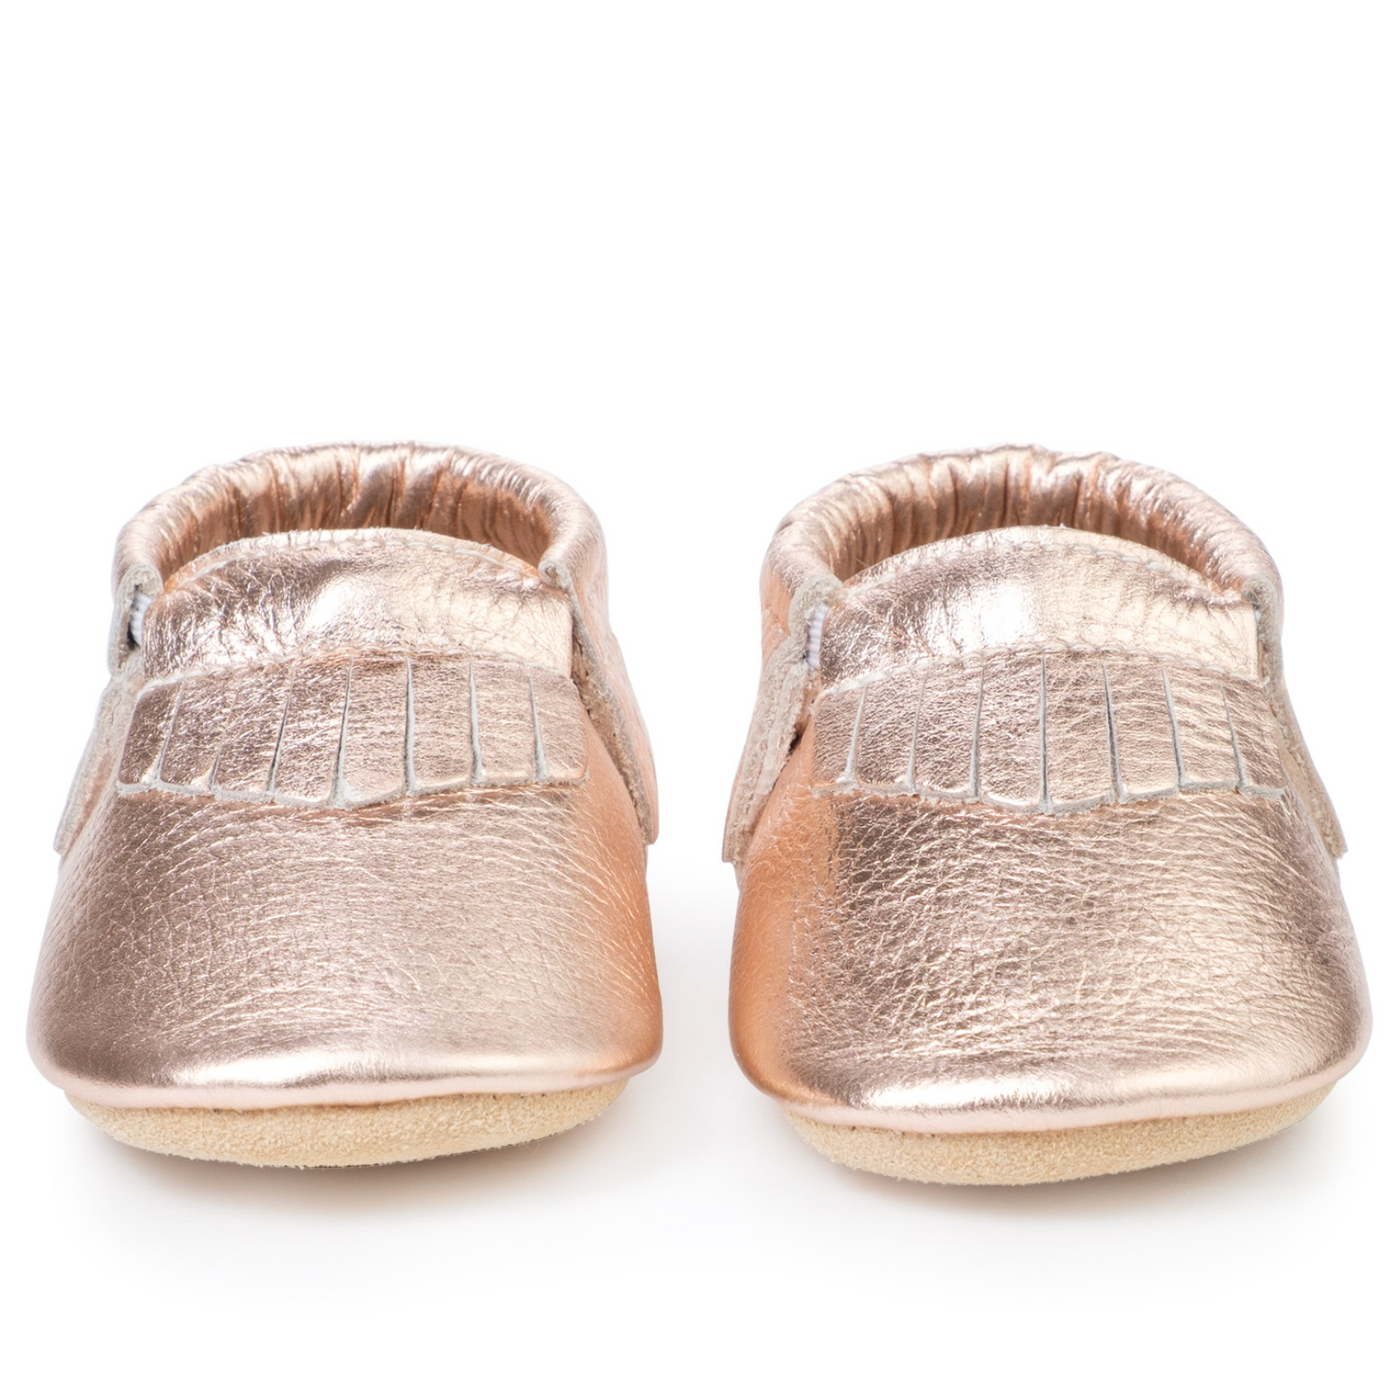 BIRD ROCK BABY MOCCASINS LEATHER ROSE GOLD (Available in 3 Sizes)